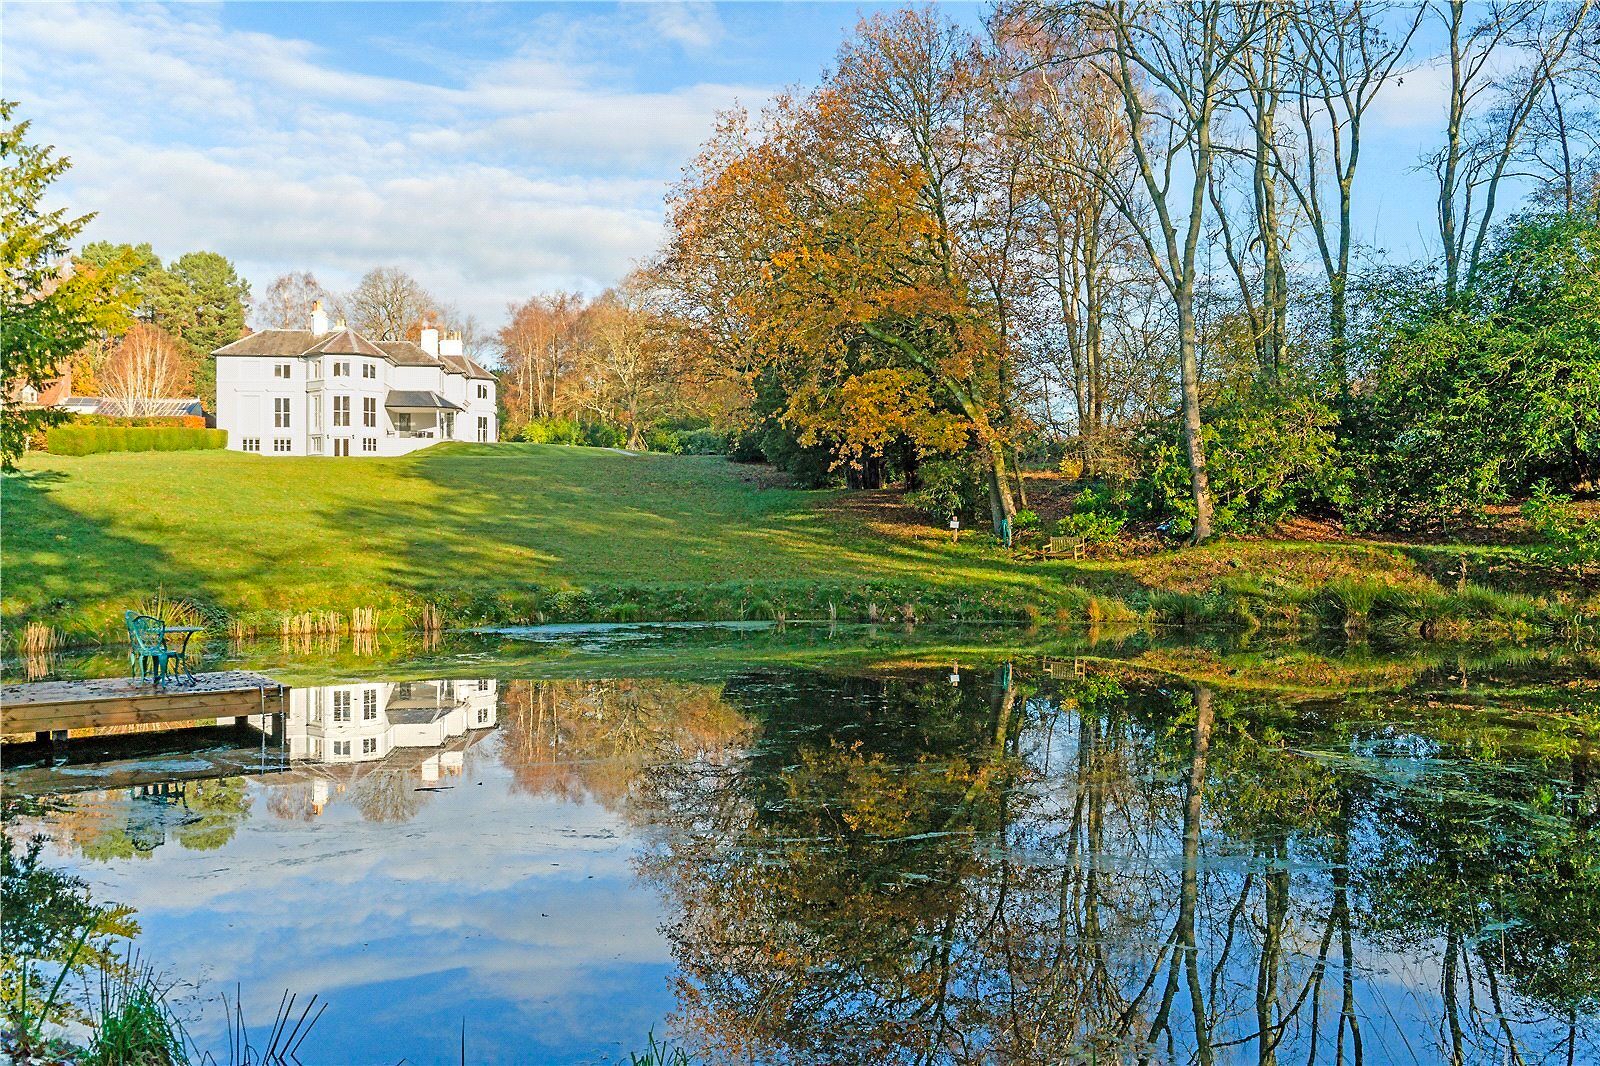 Five Glorious Properties For Sale, As Seen In Country Life